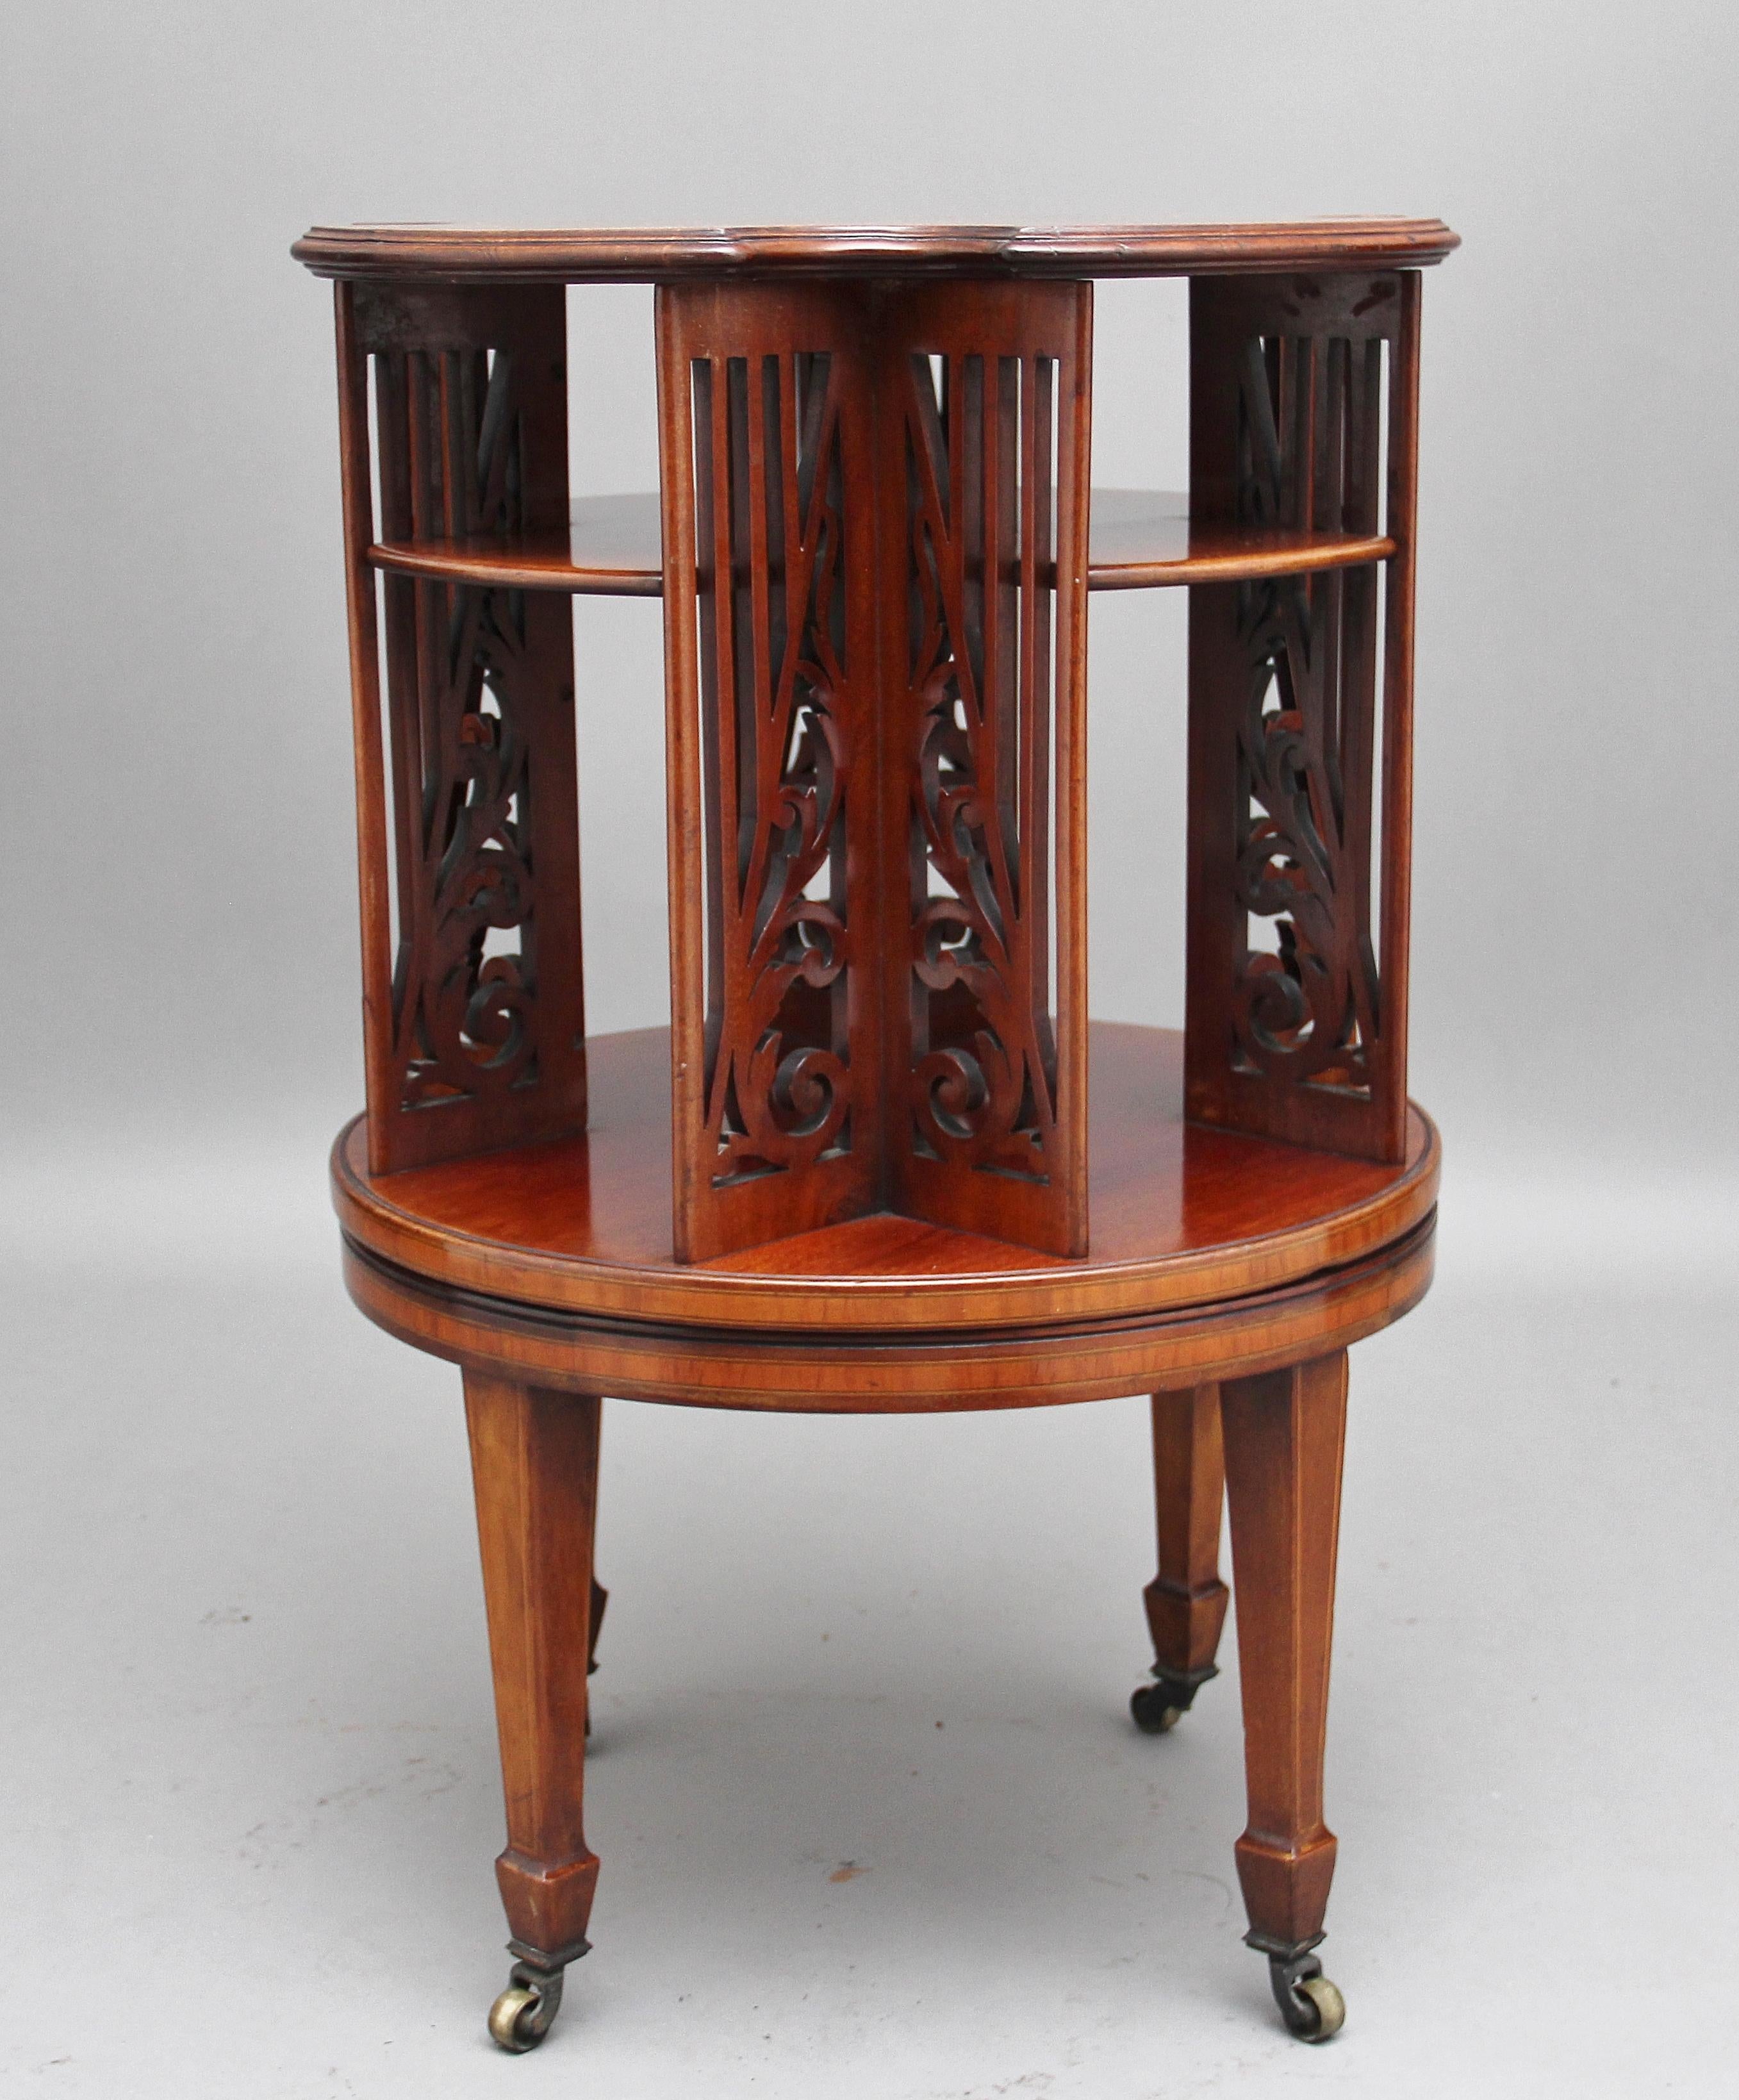 19th century mahogany, satinwood banded and further inlaid revolving bookcase of shaped circular form, the central medallion with classical and foliate scroll decoration, having pierced side panels, standing on square tapering legs ending on brass